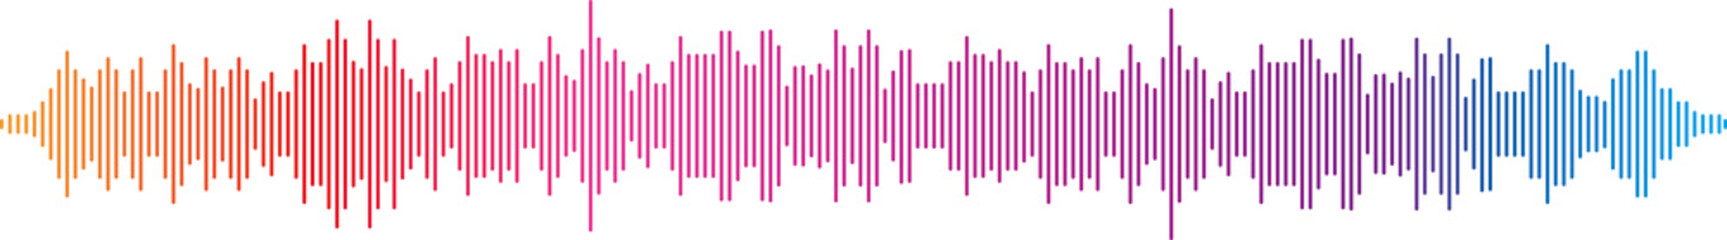 Images of rainbow color sound waveforms and sound pressure